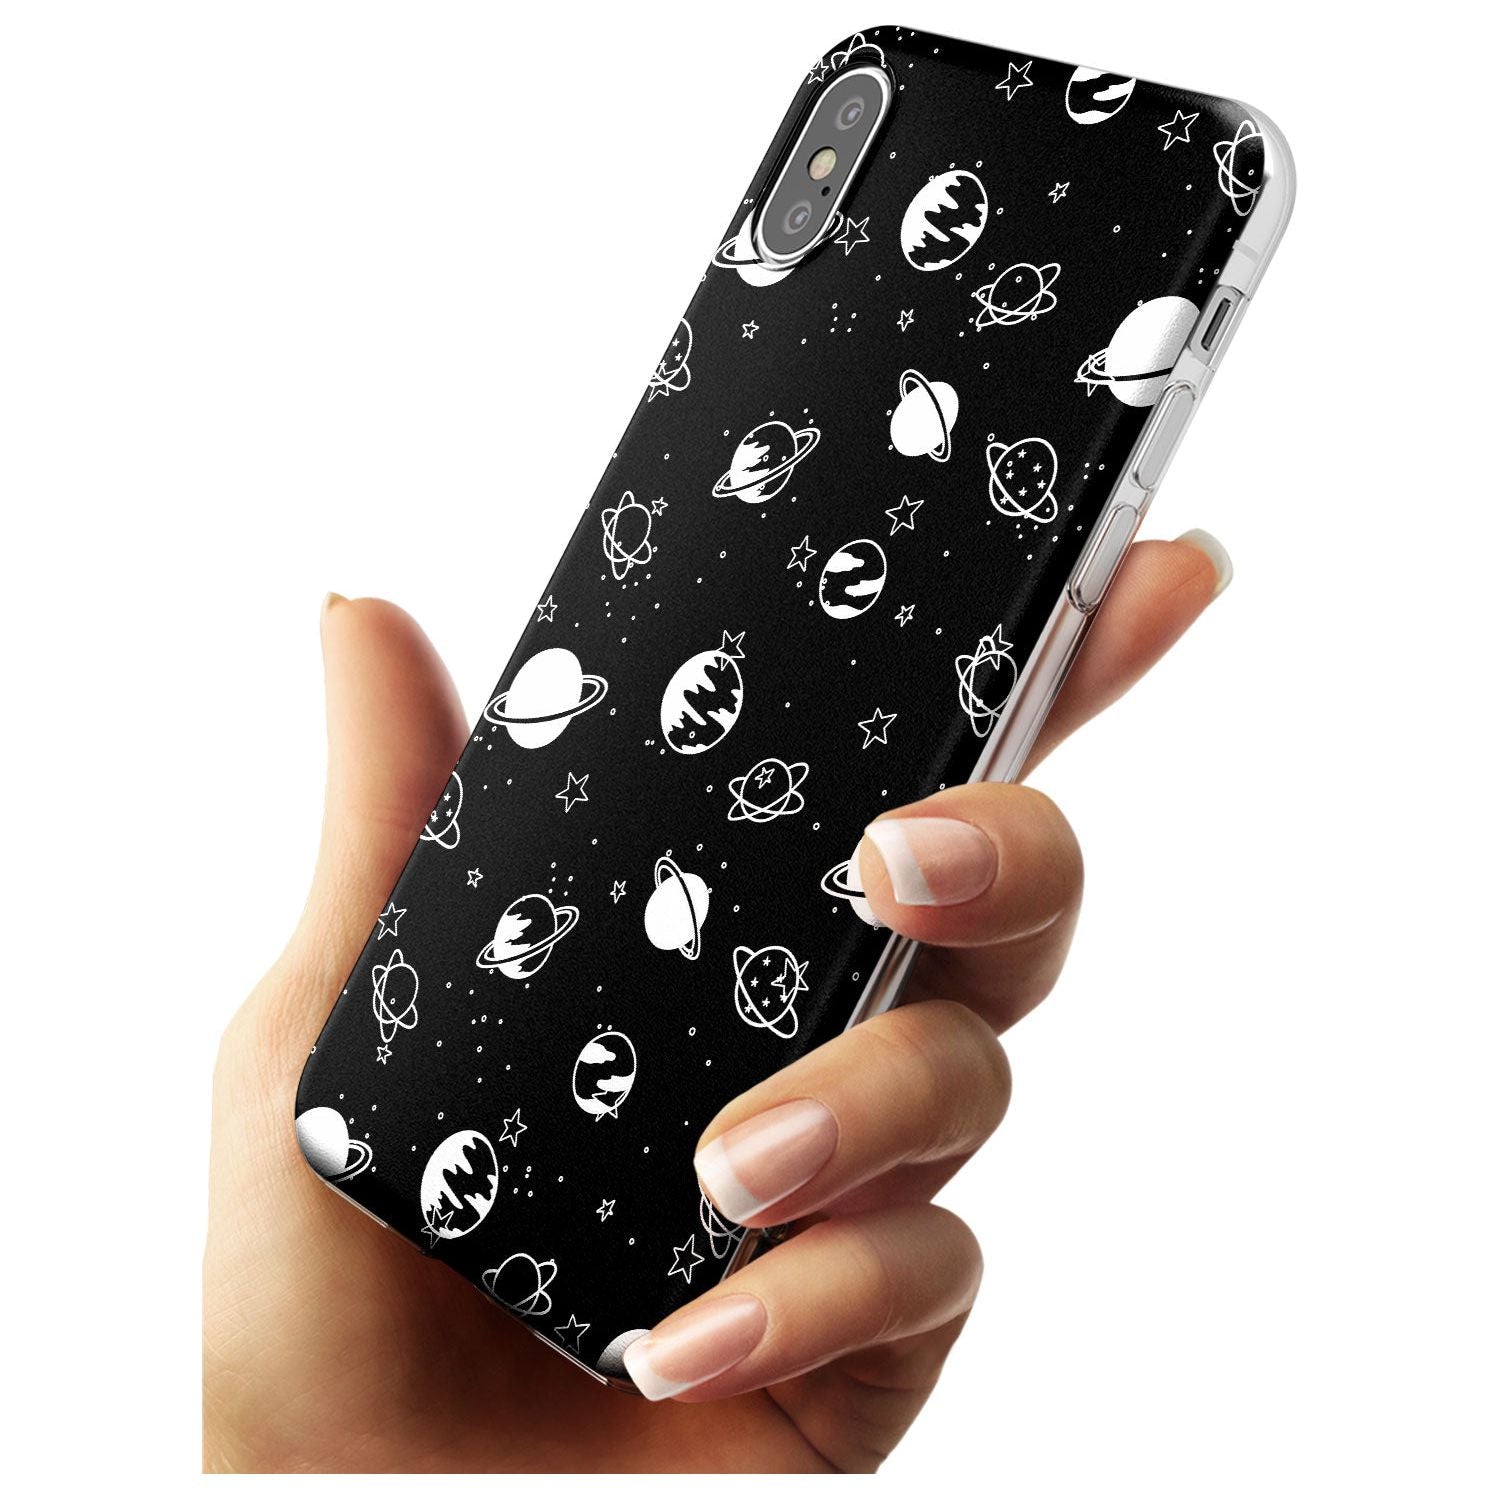 White Planets on Black Black Impact Phone Case for iPhone X XS Max XR